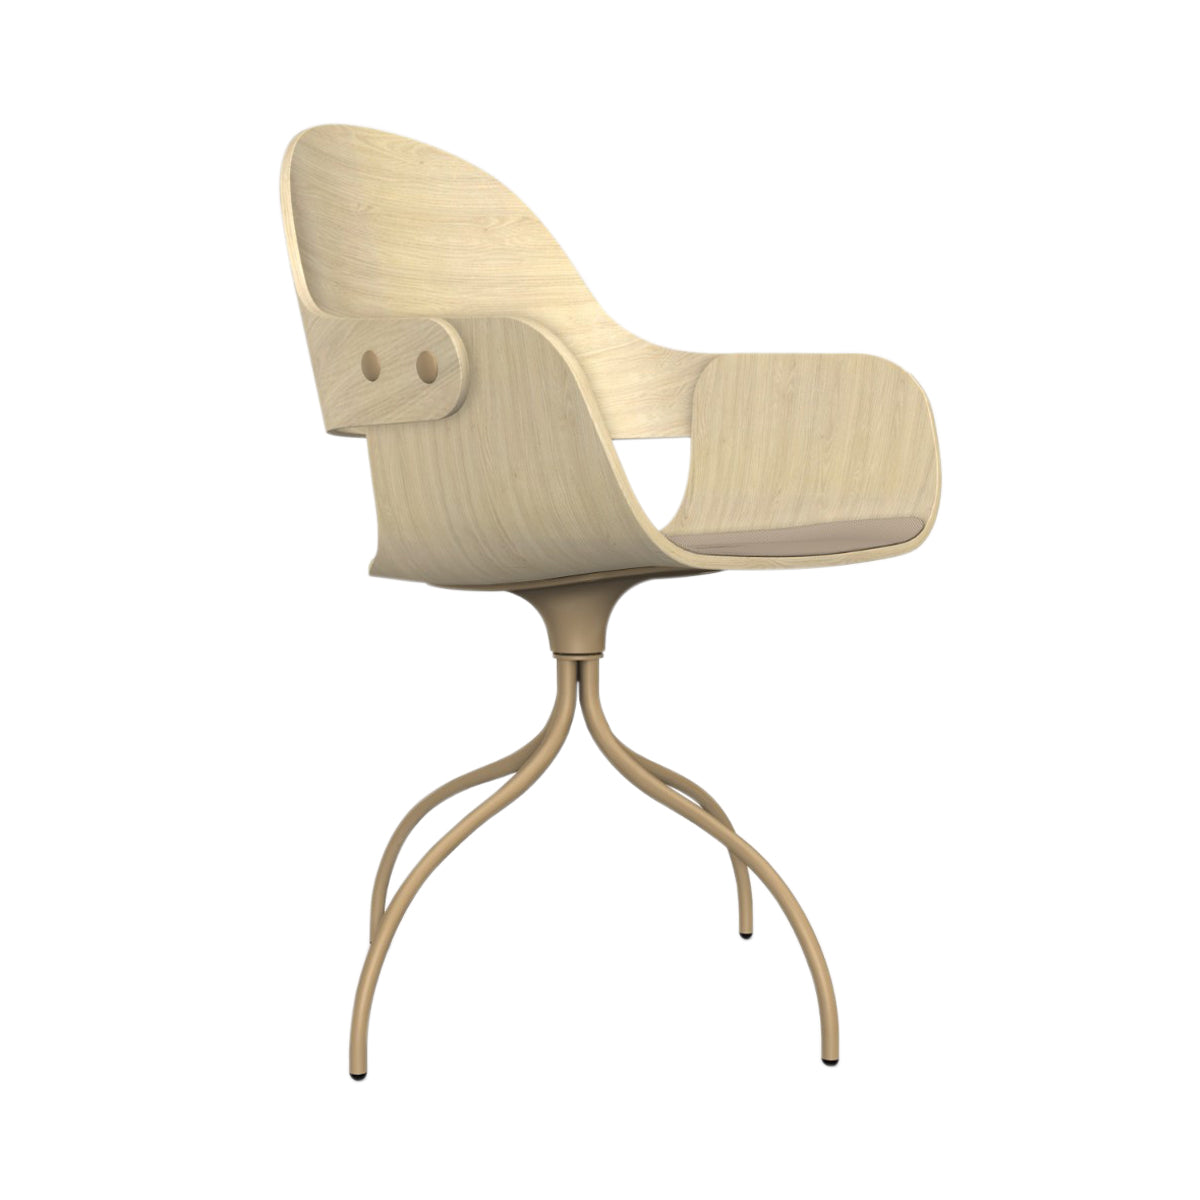 Showtime Nude Chair with Swivel Base: Seat Upholstered + Natural Ash + Beige